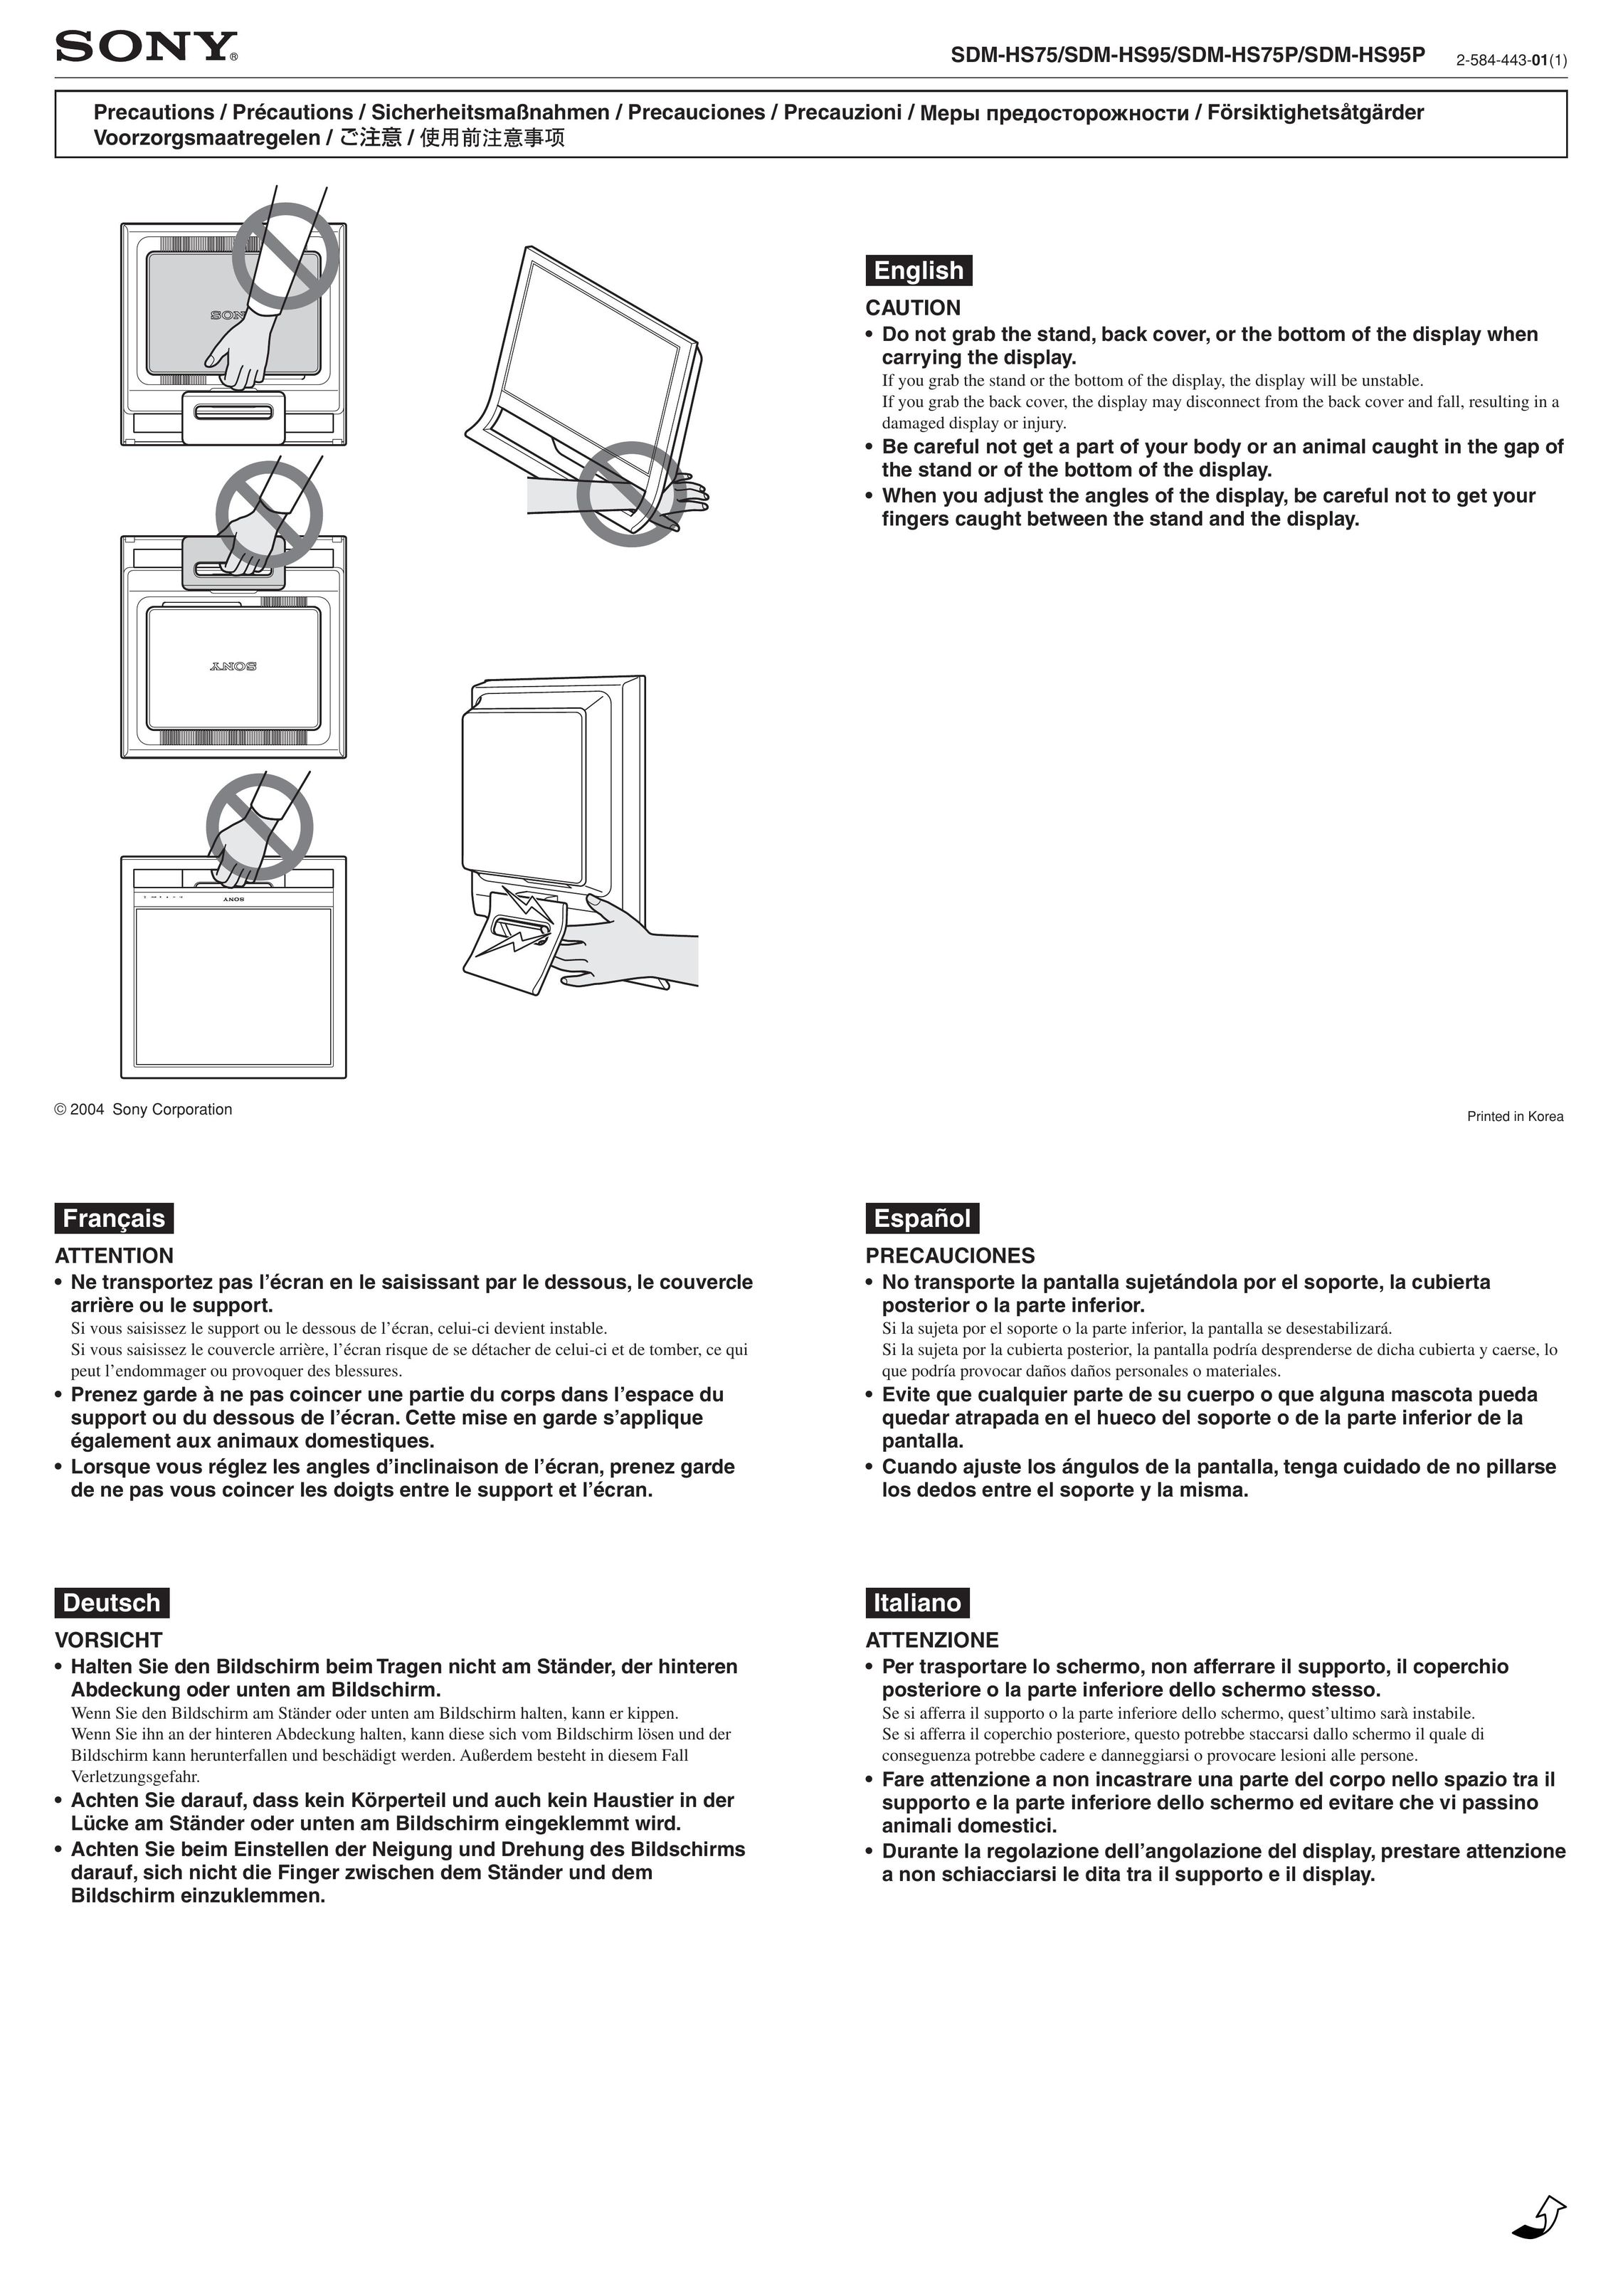 Sony SDM-HS95 Home Theater Screen User Manual